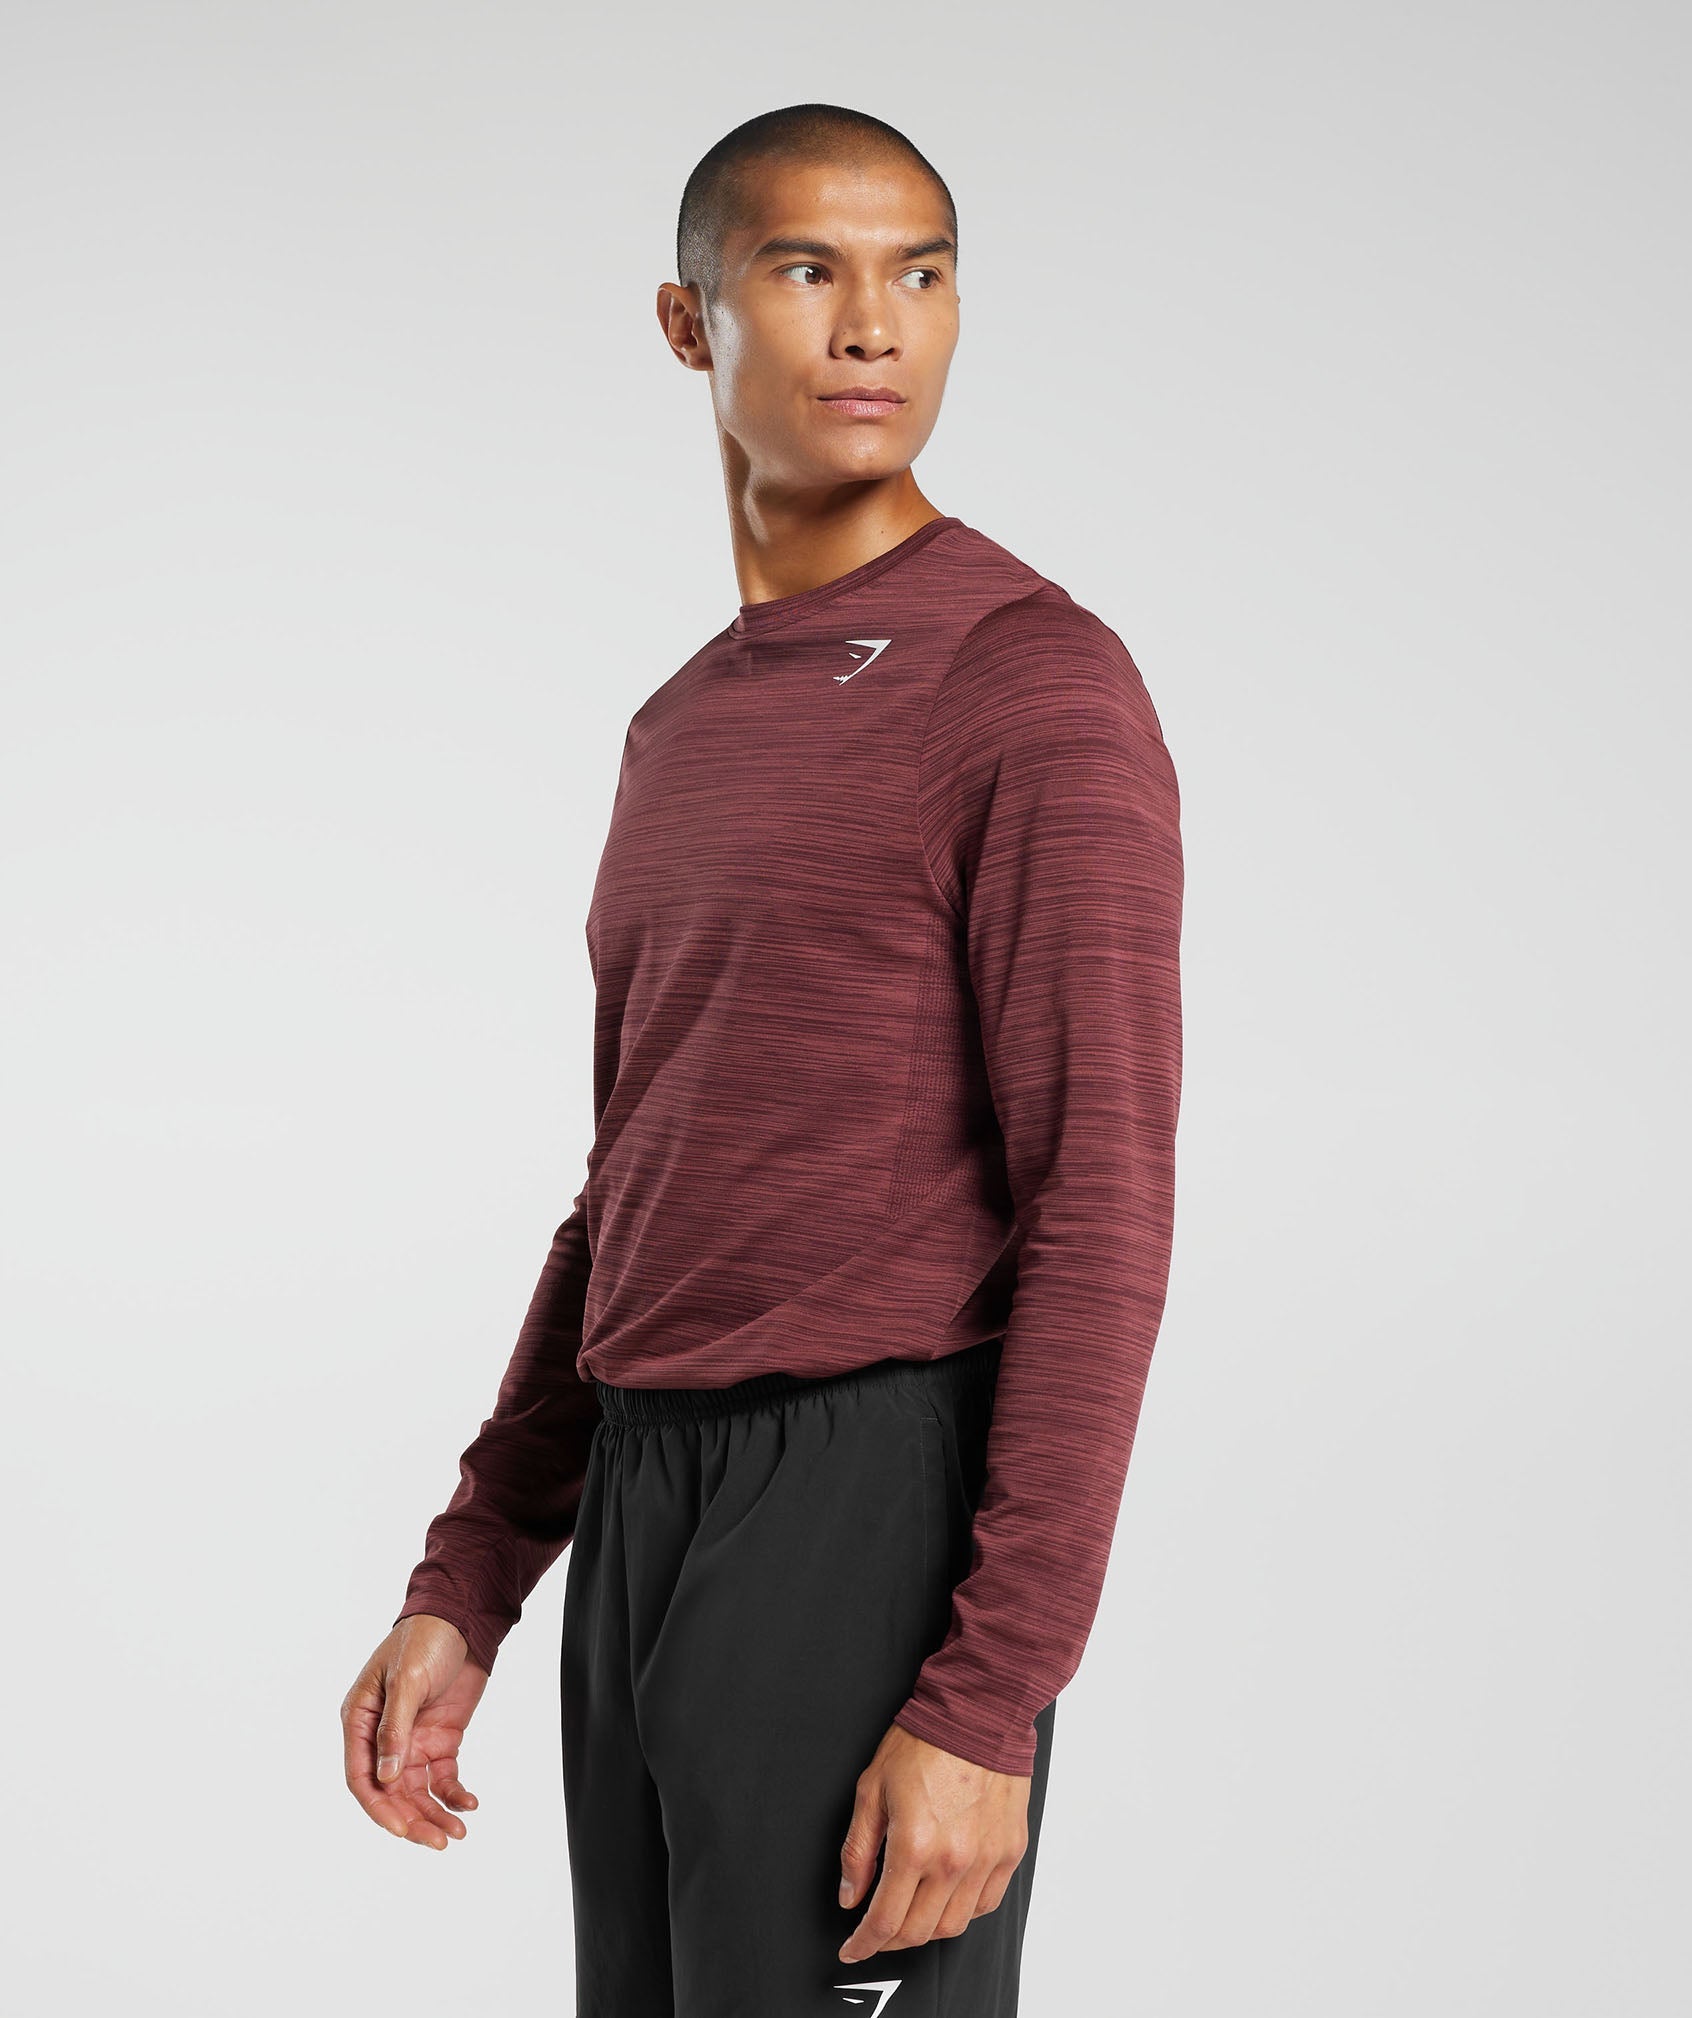 Heather Seamless Long Sleeve T-Shirt in Rich Maroon/Washed Burgundy - view 3